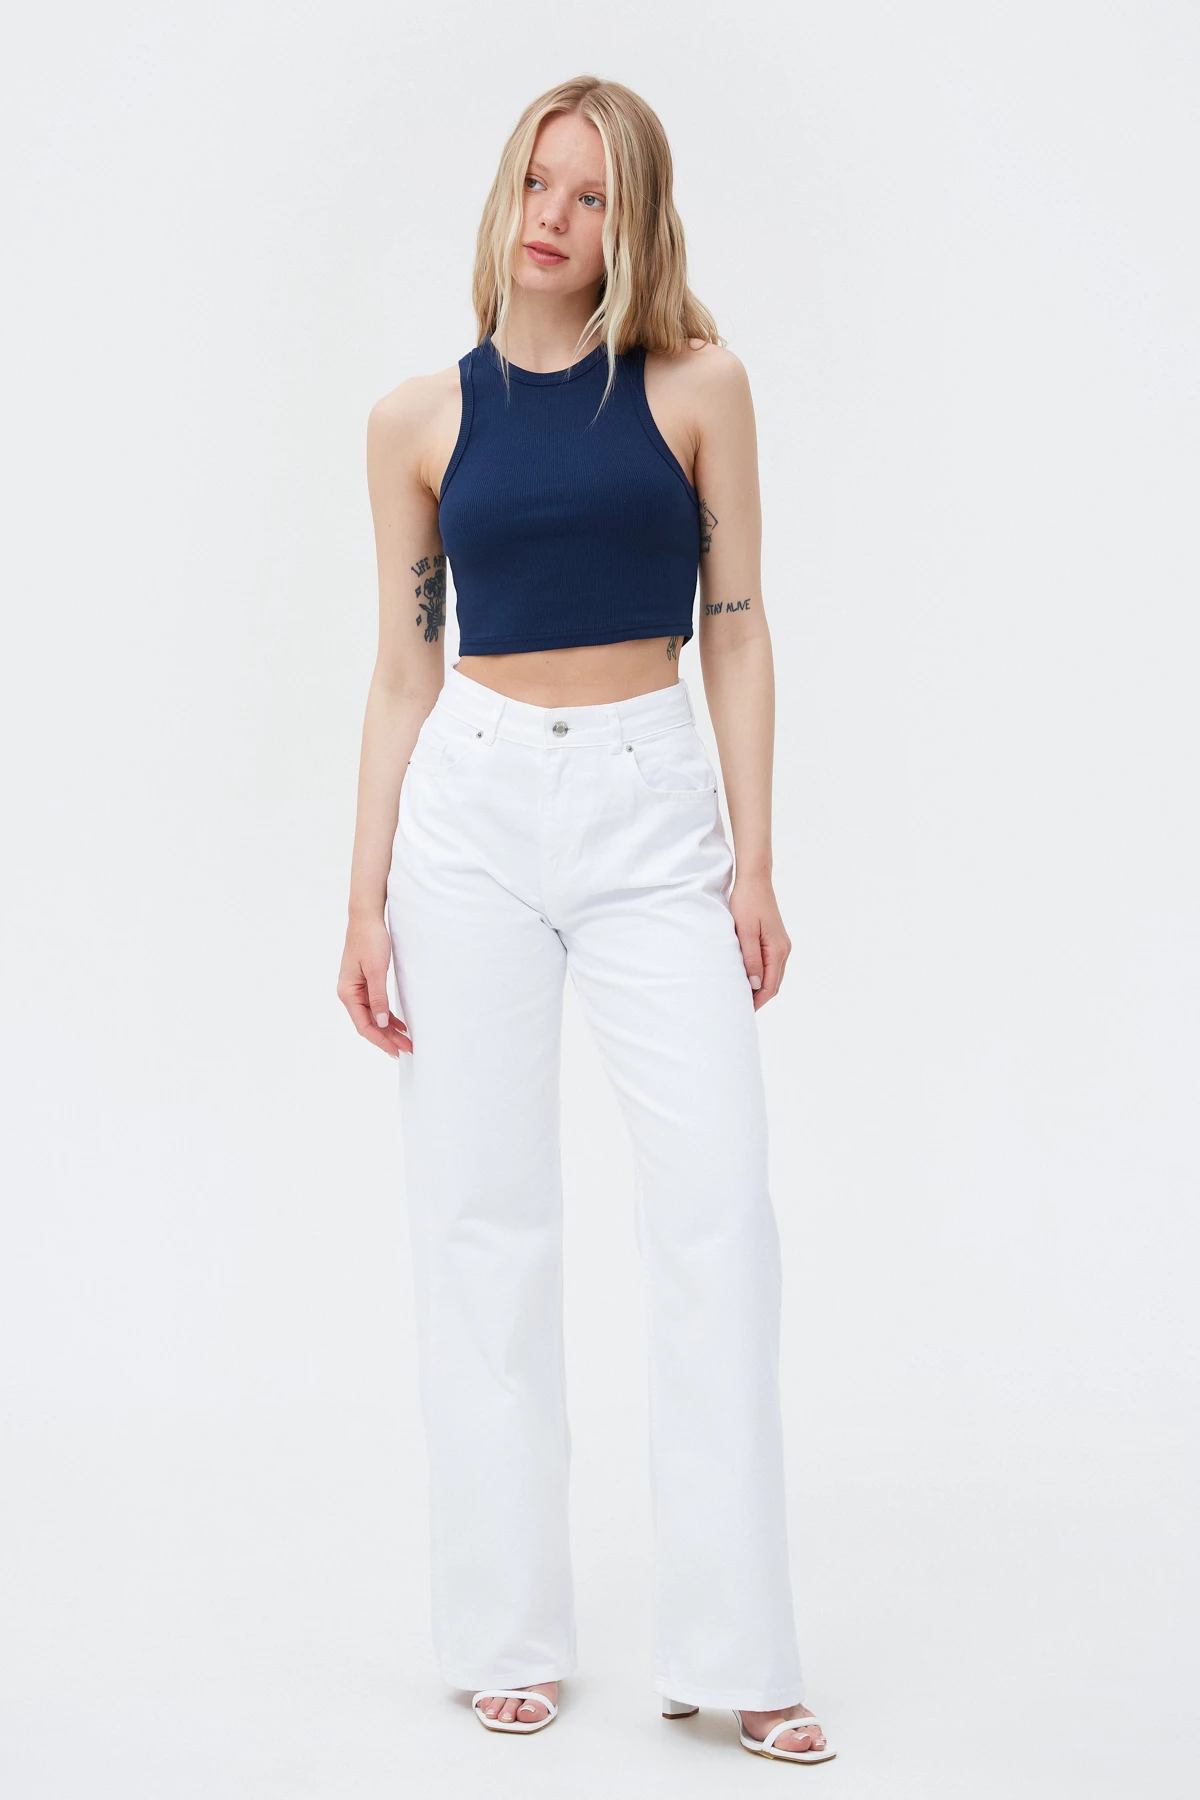 Navy blue cotton crop top with an oval neckline, photo 2